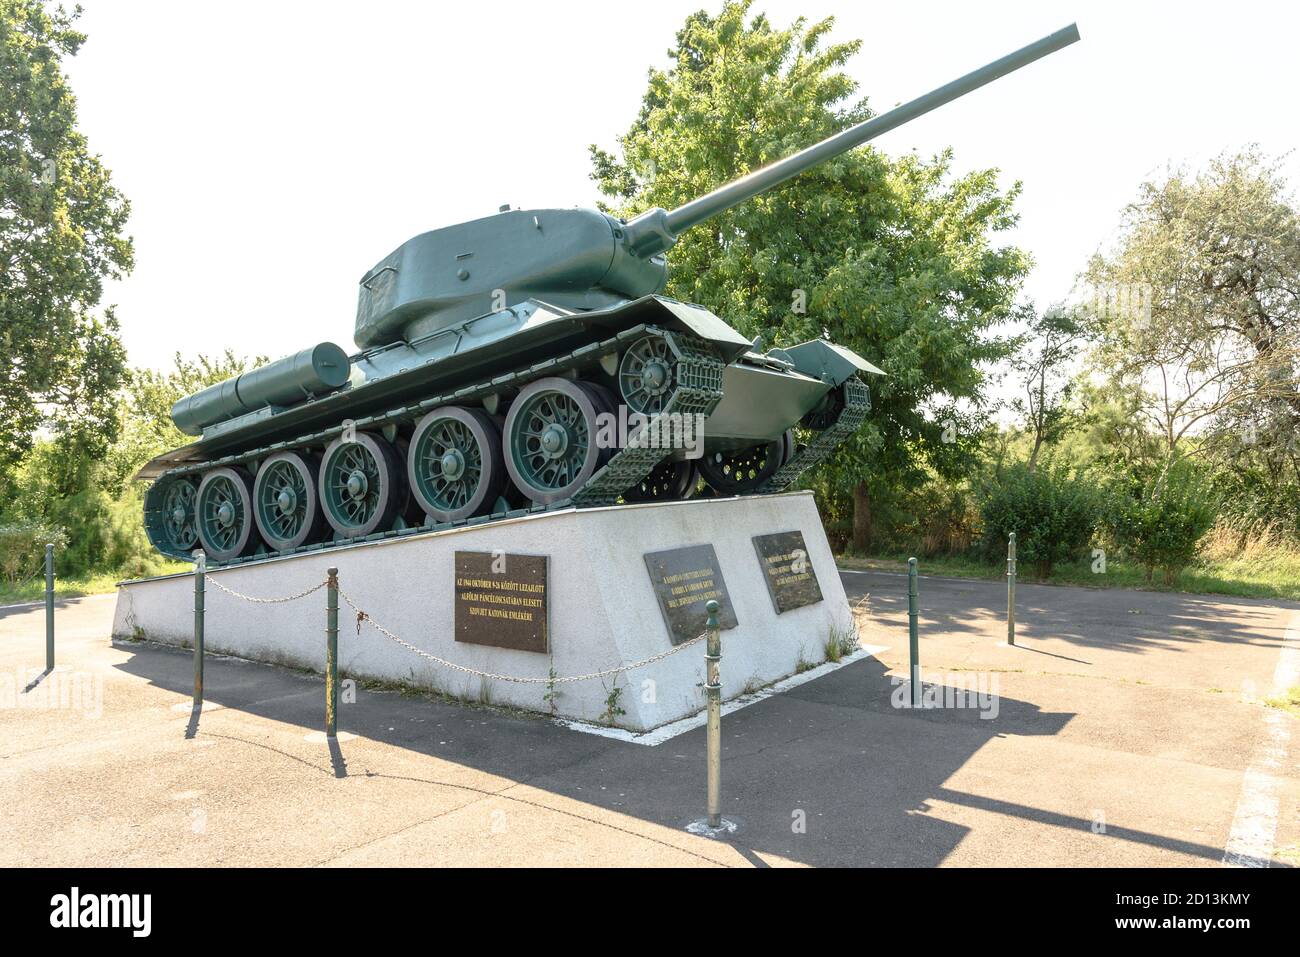 The Soviet War Memorial featuring a T-34 tank in Hortobagy, Hungary Stock Photo